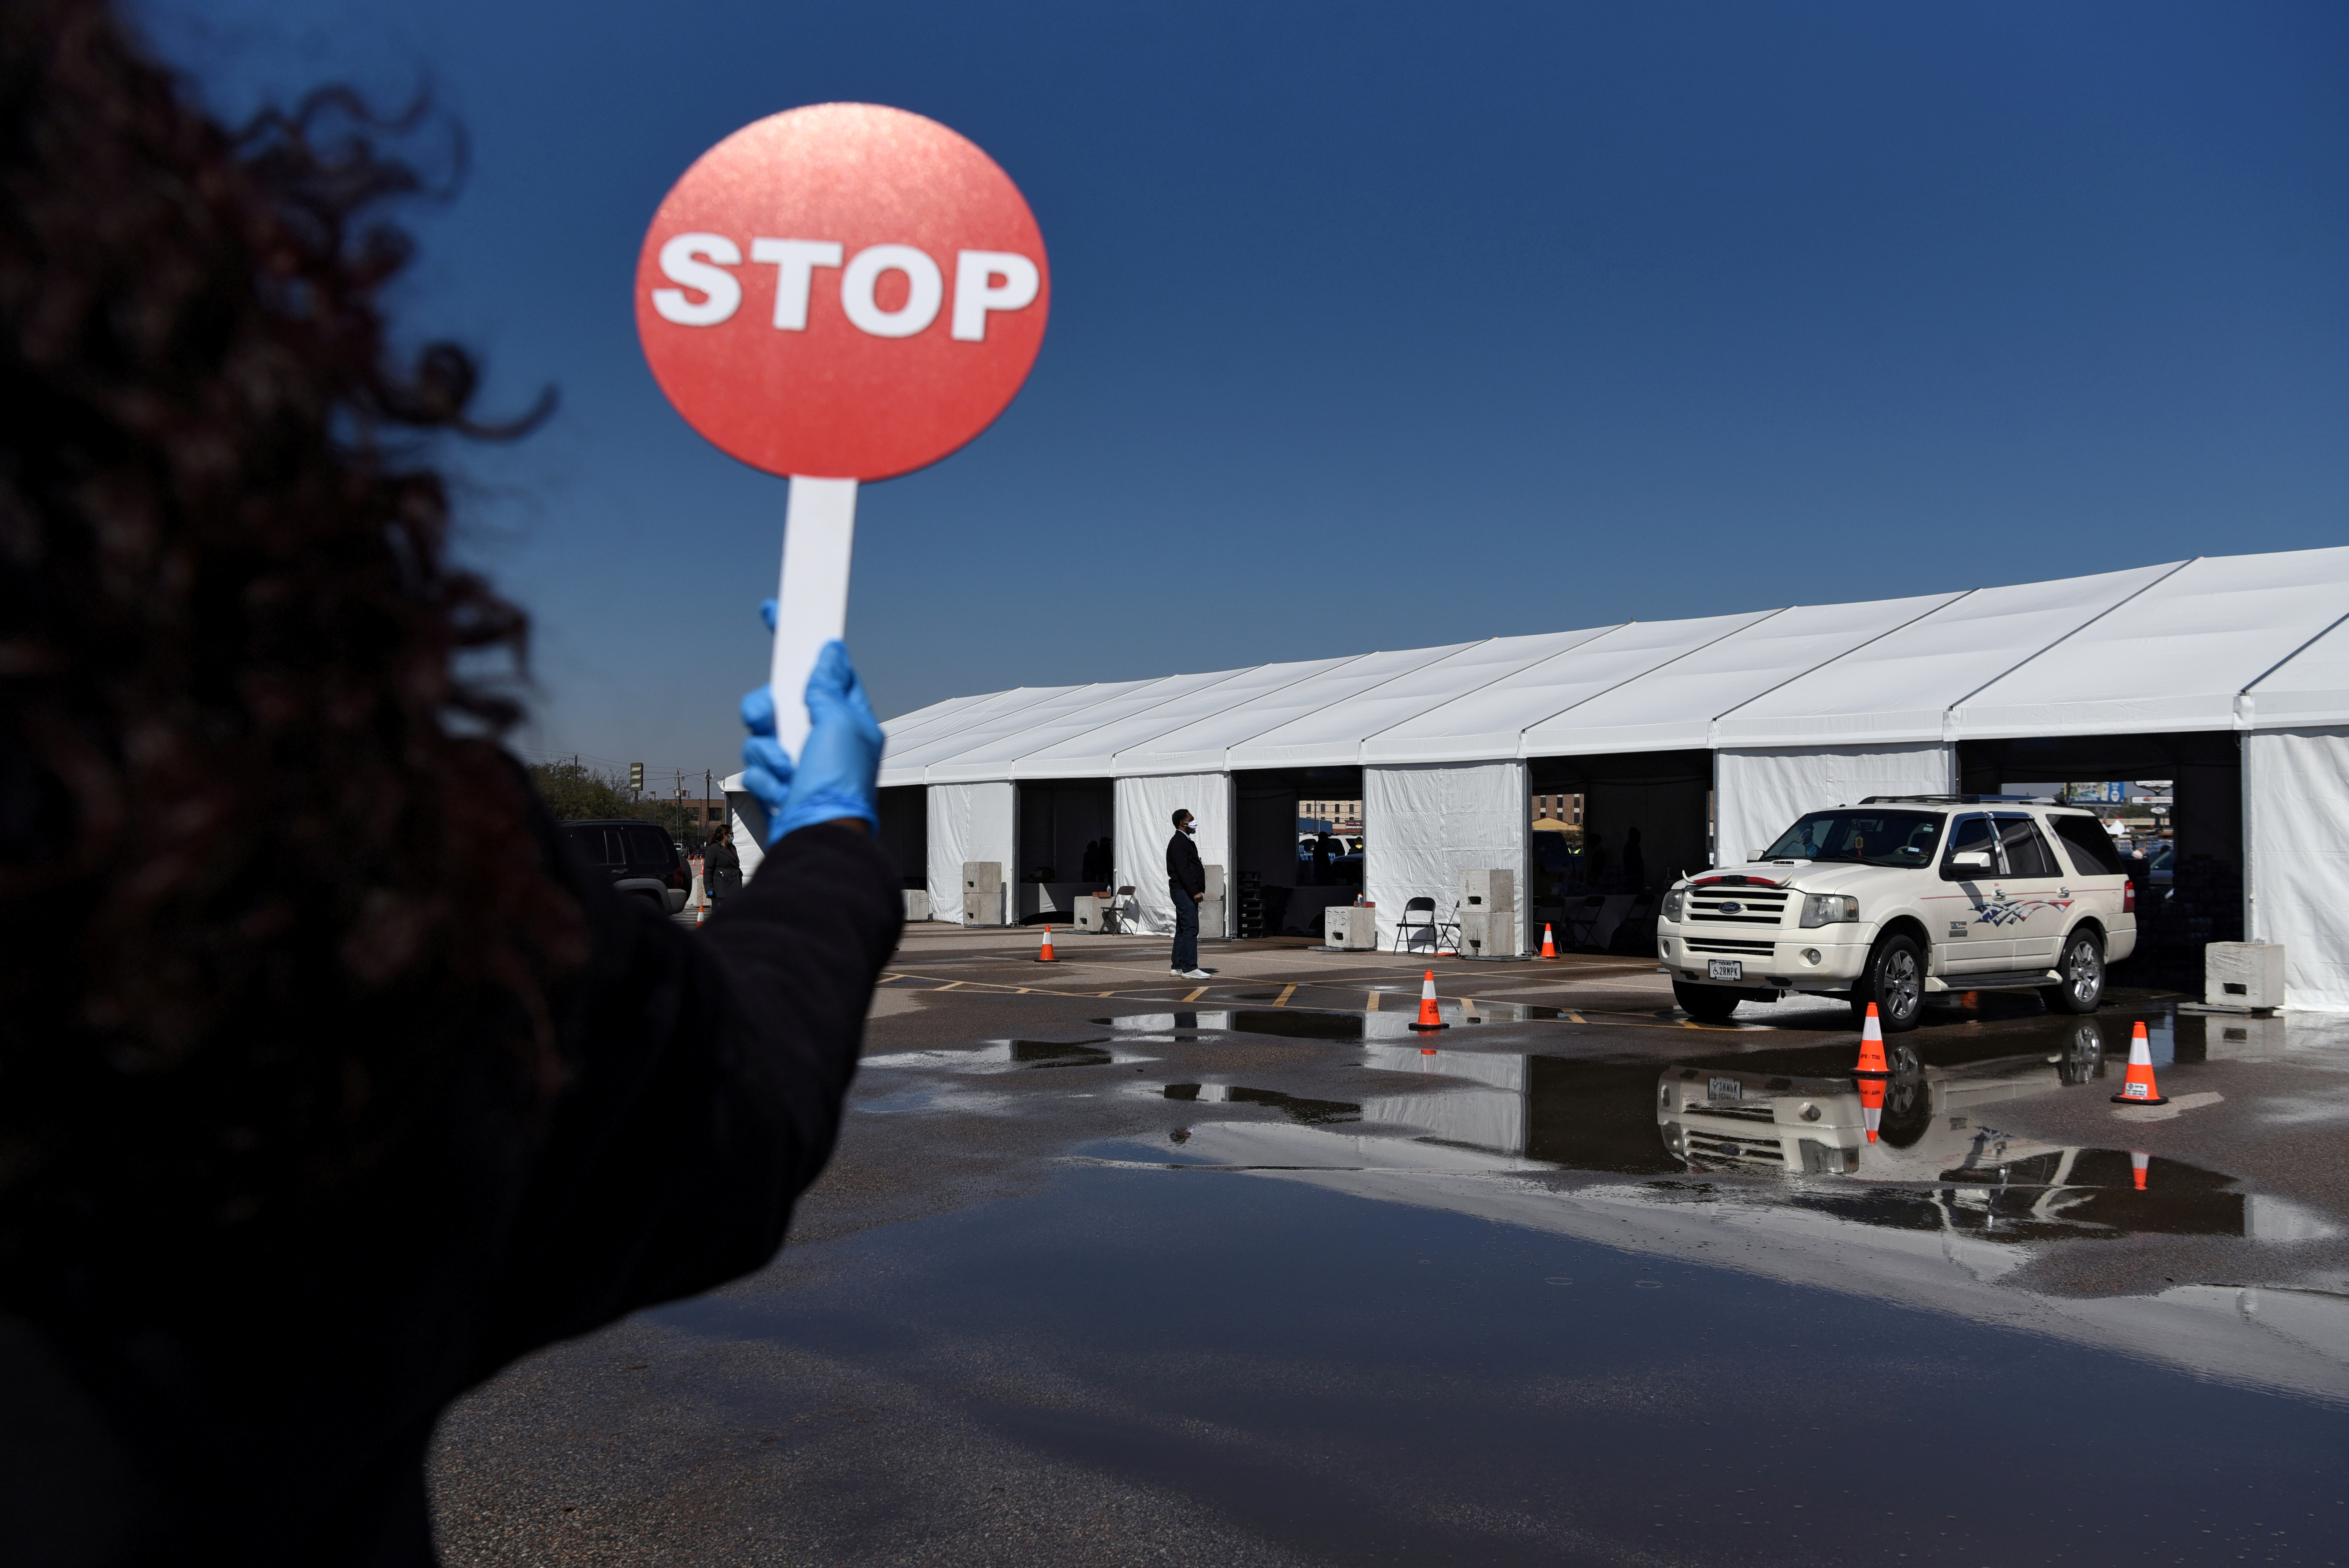 A volunteer directs traffic as hundreds of cars line up to receive free cases of water after the city of Houston implemented a boil water advisory following an unprecedented winter storm, at Delmar Stadium in Houston, Texas, U.S., February 19, 2021.  REUTERS/Callaghan O'Hare